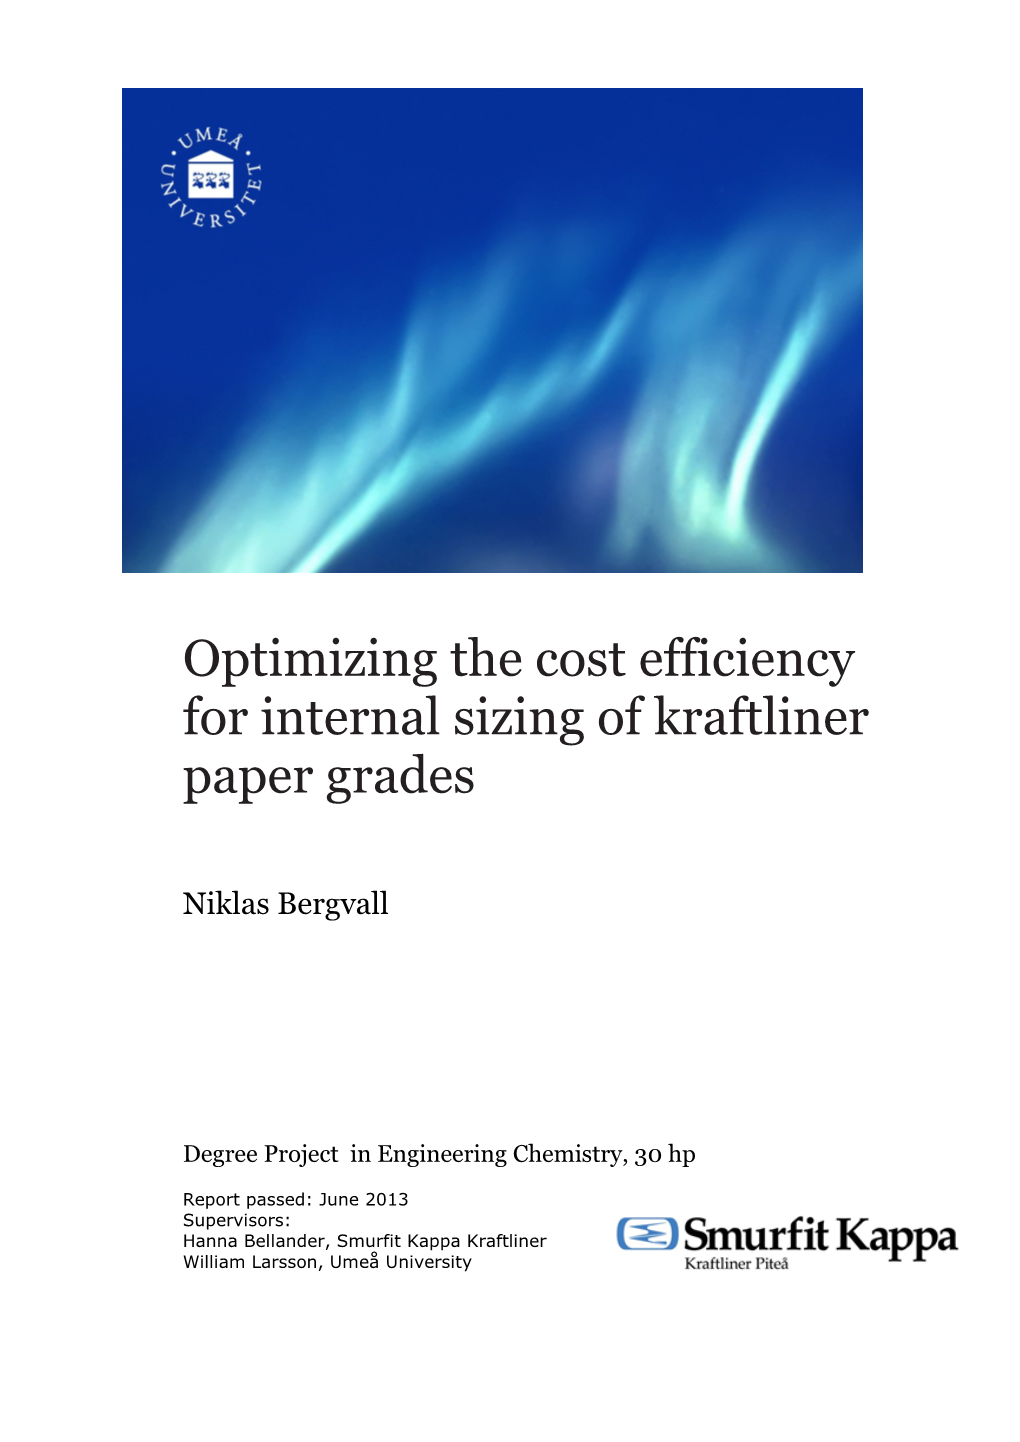 Optimizing the Cost Efficiency for Internal Sizing of Kraftliner Paper Grades